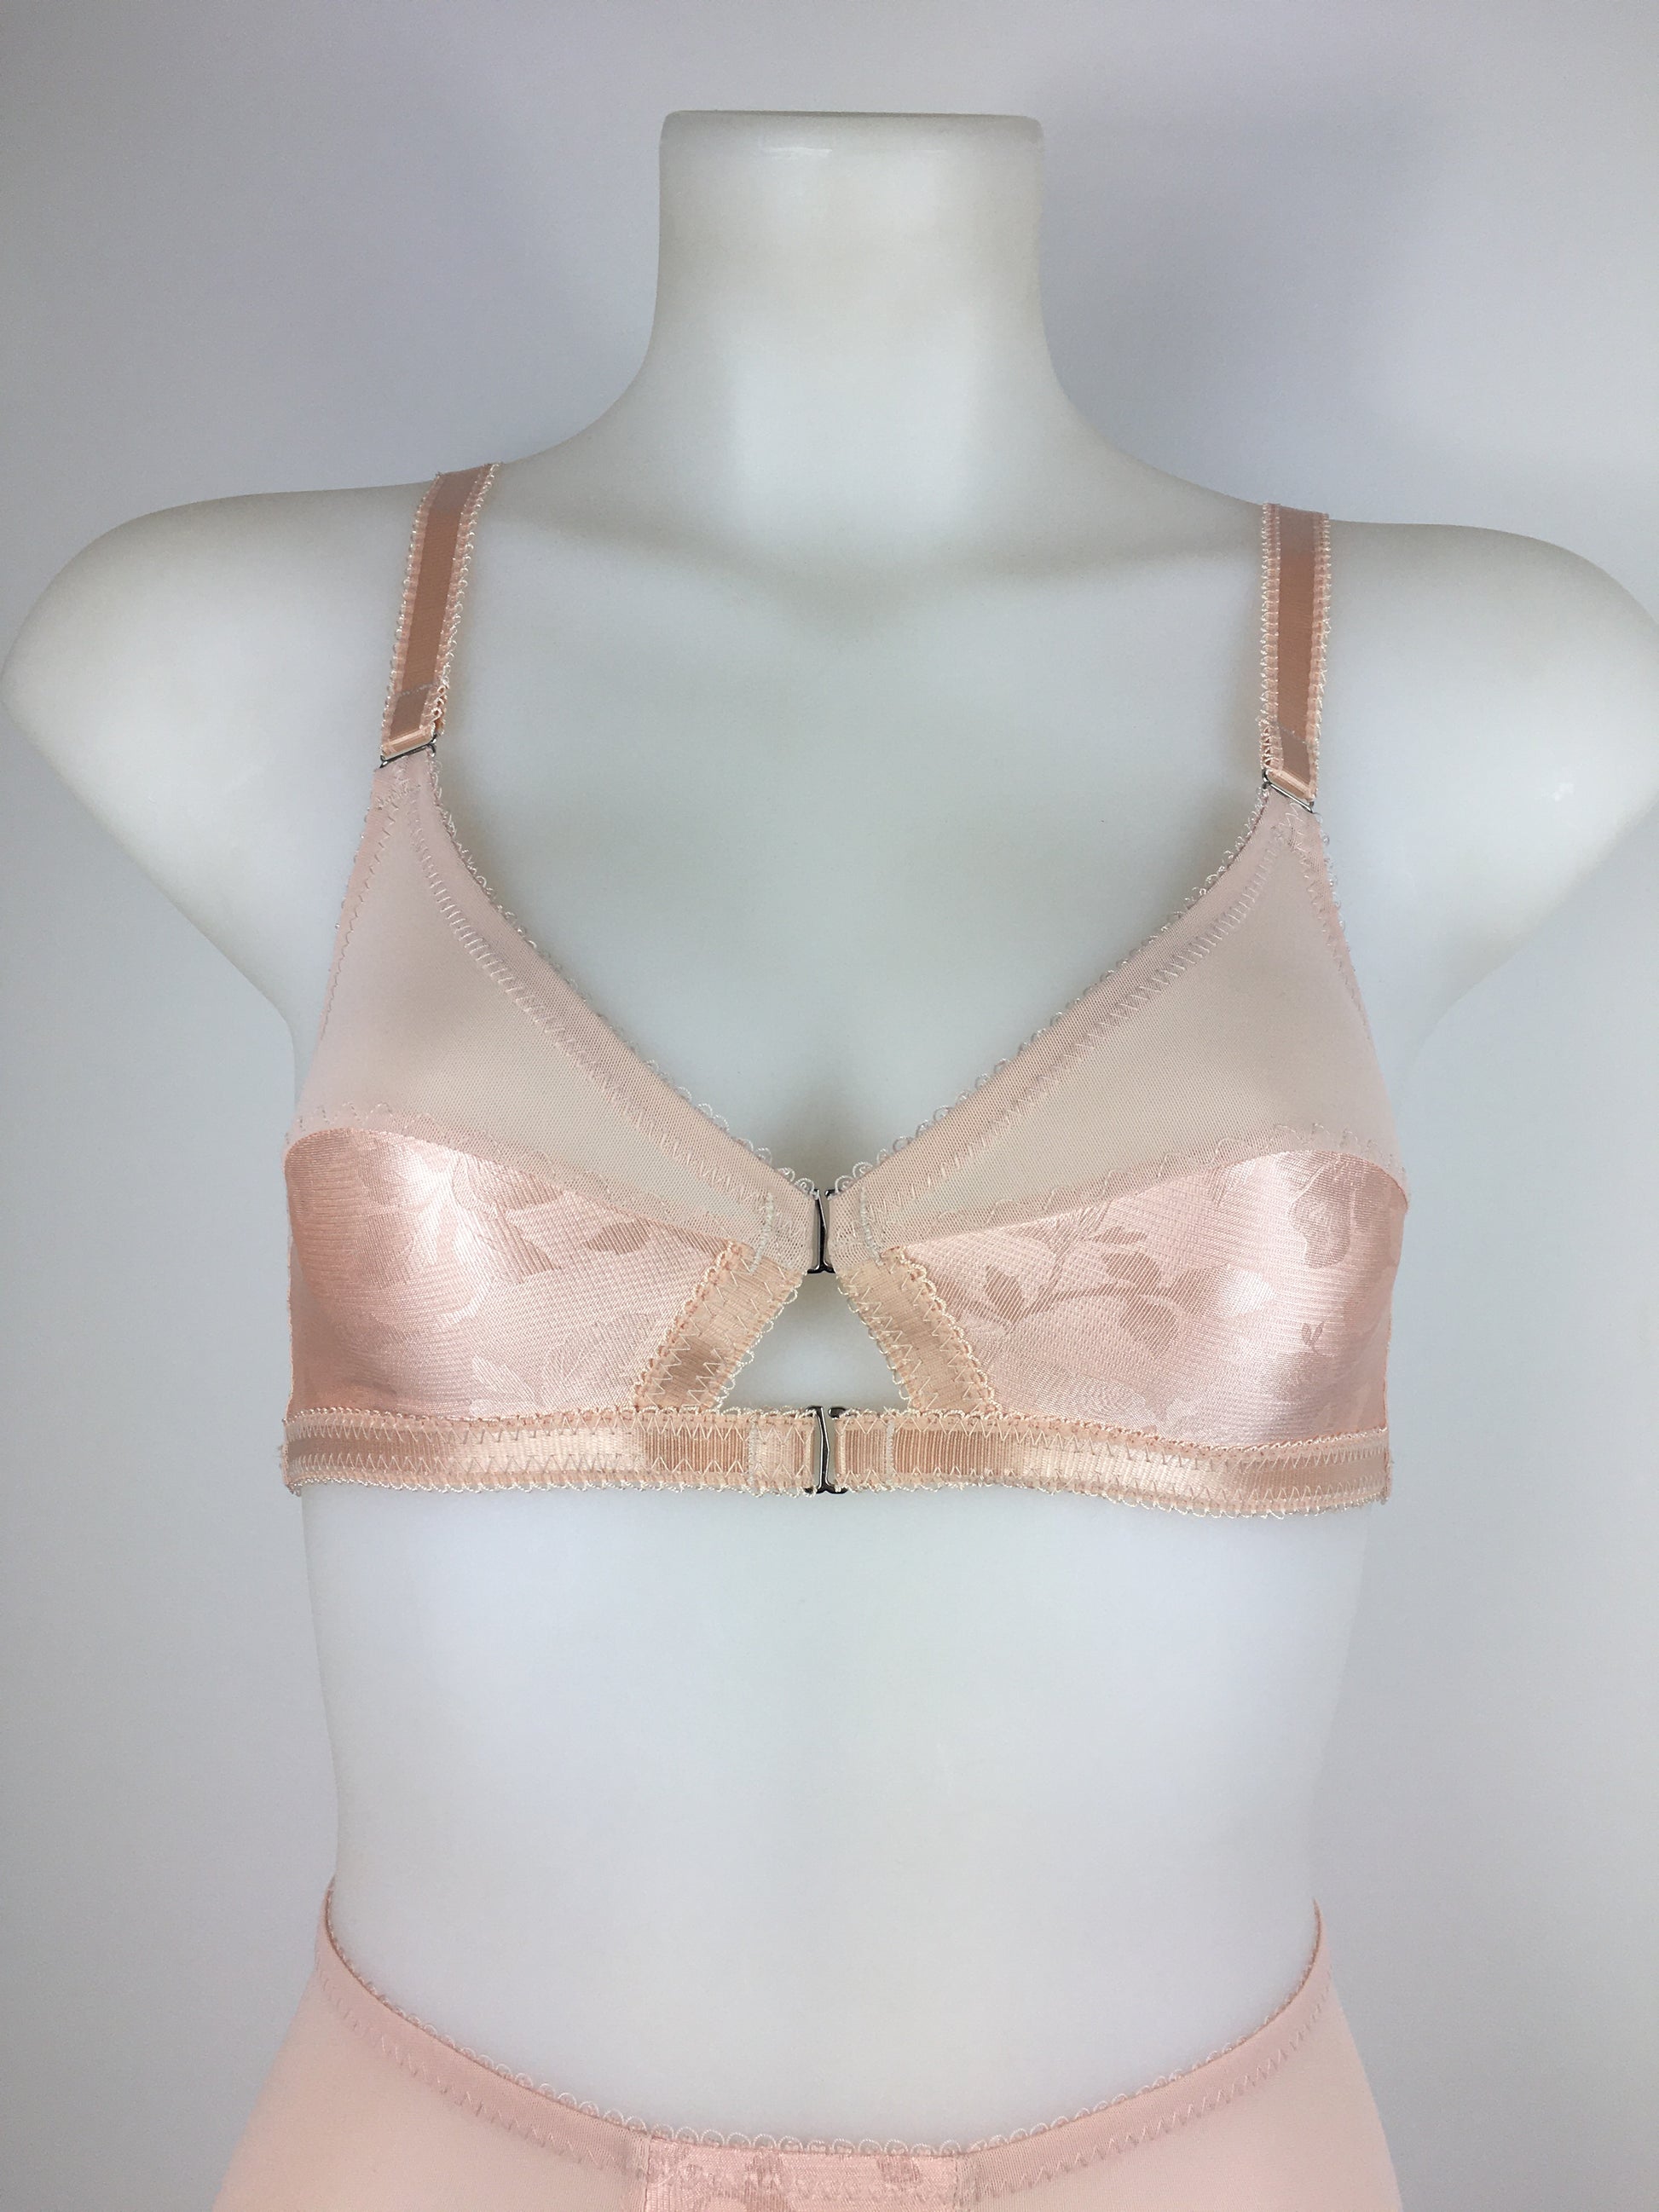 Our most authentic looking vintage inspired lingerie yet. Perfect peachy satin front fastening soft bra with faux vintage peach lower cups and nude biscotti mesh upper cups. Fastens at the front with two hooks. Our signature bralette shape makes the perfect faux 1950s 1940s bra. Not as pointed as a bullet bra, the bra gives a subtle vintage silhouette